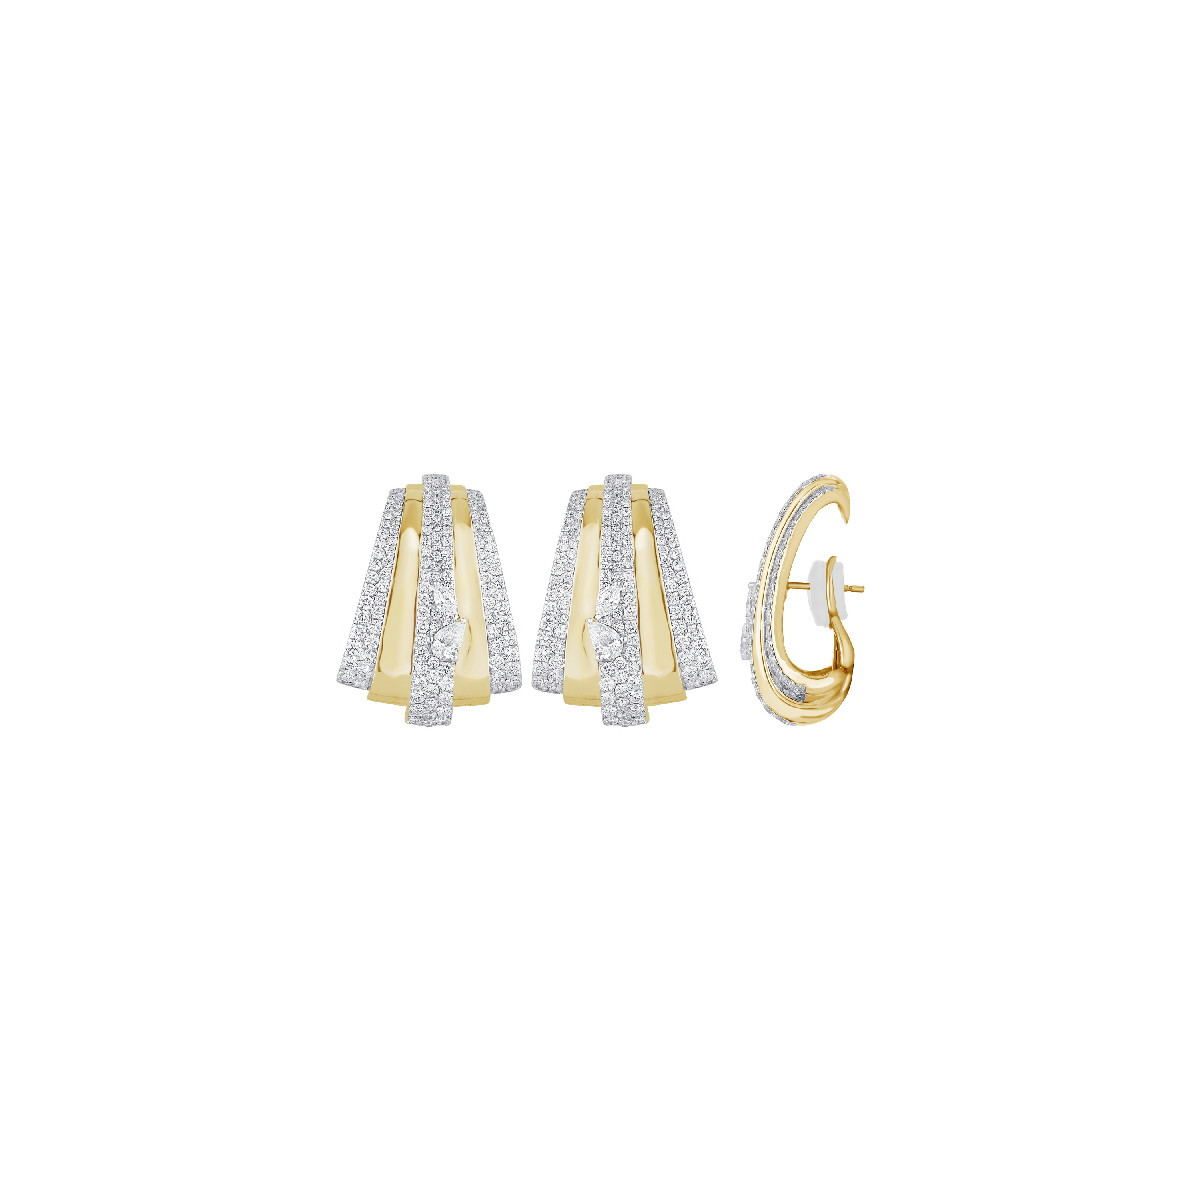 Gold and diamonds earrings.